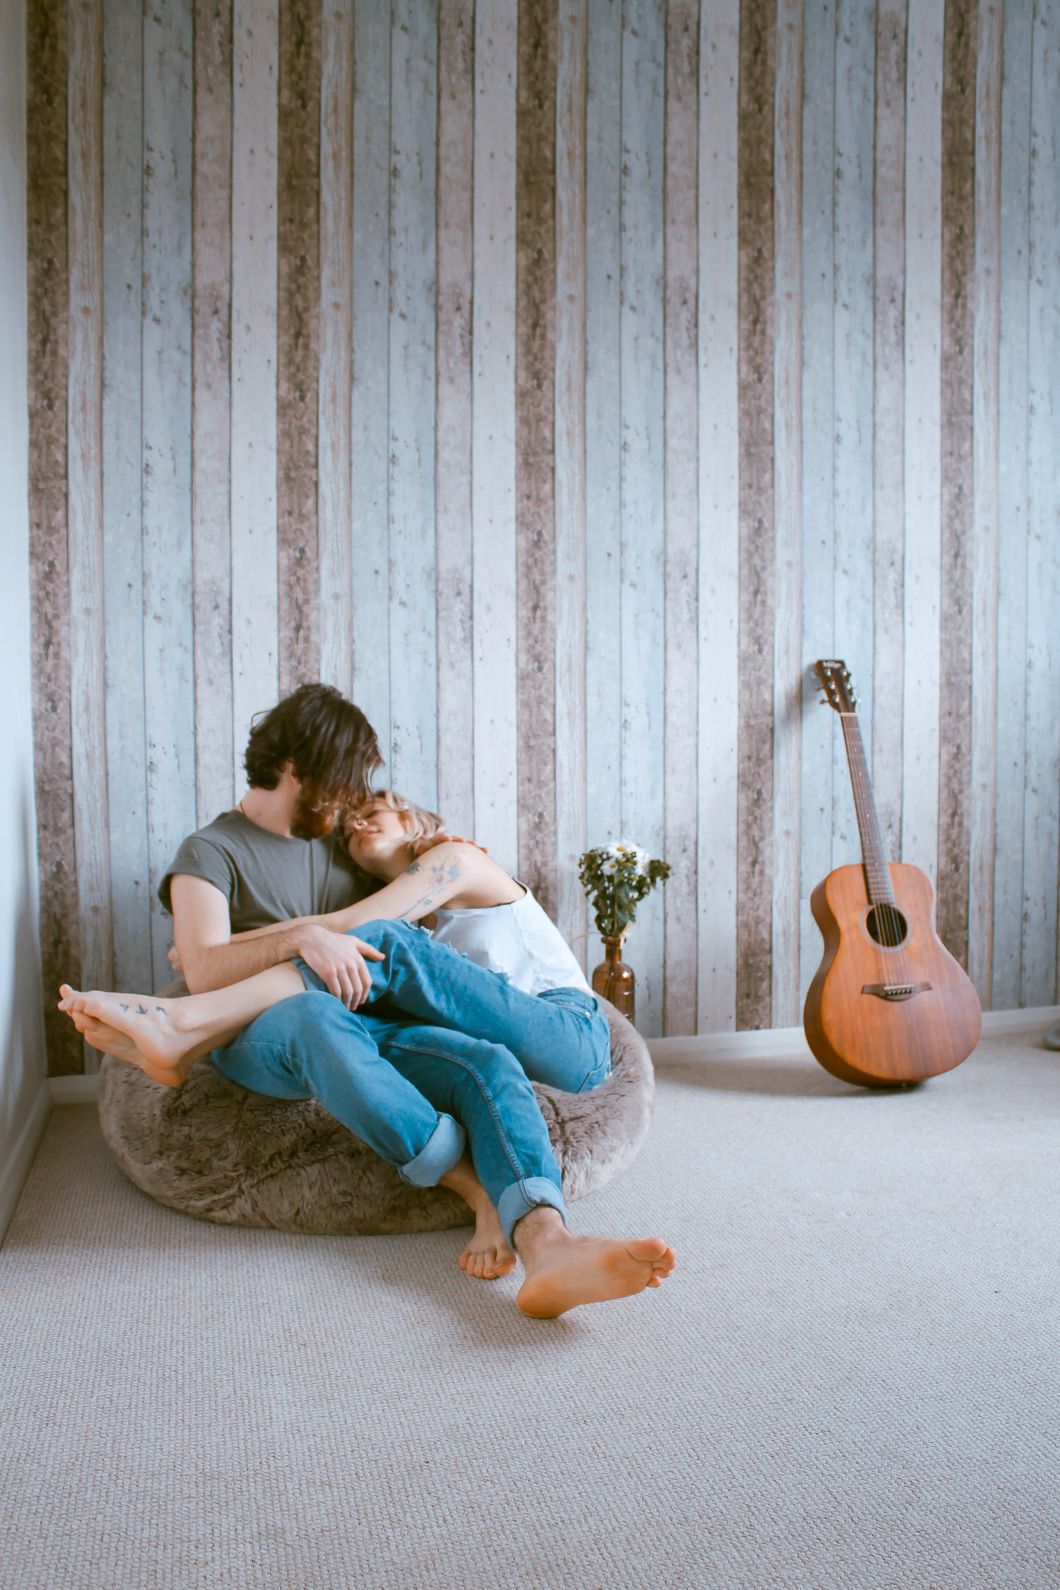 5 Tips For Loving Someone With A Different Love Language Than You